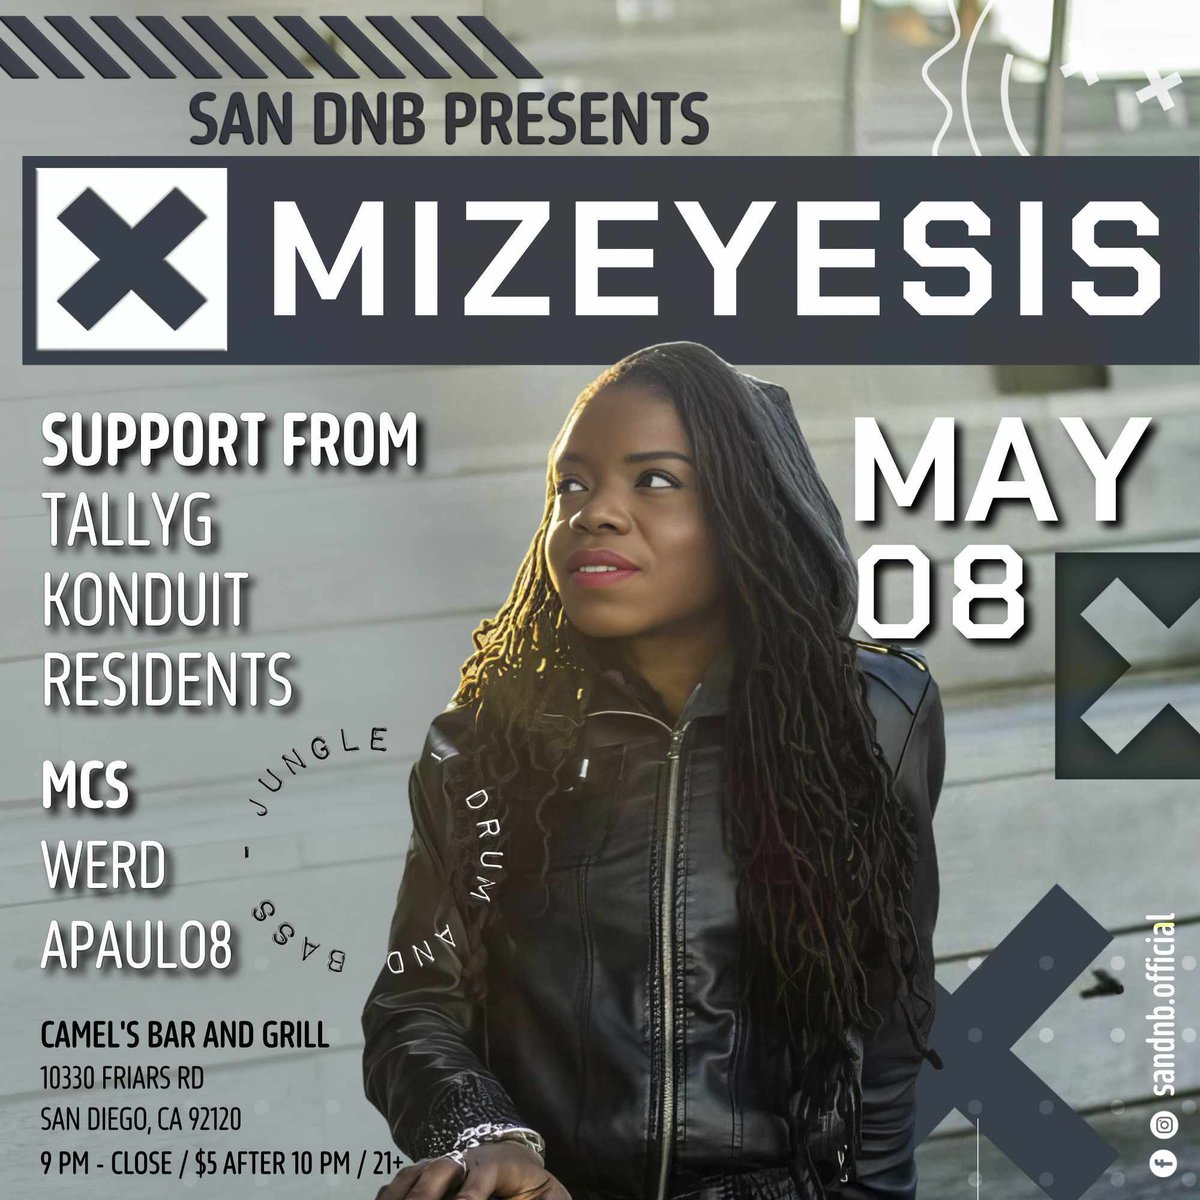 Heading to the west side in May for a few dates and 1st stop is San Diego, CA on May 8th. Shouts out to San DNB For the invite!
Link: facebook.com/events/4192412…
#jungle #dnb #drumandbass #dnbgirls #dnbgirlscrew #drumandbassgirls #electronicdancemusic #electronicmusic #djing #djlife